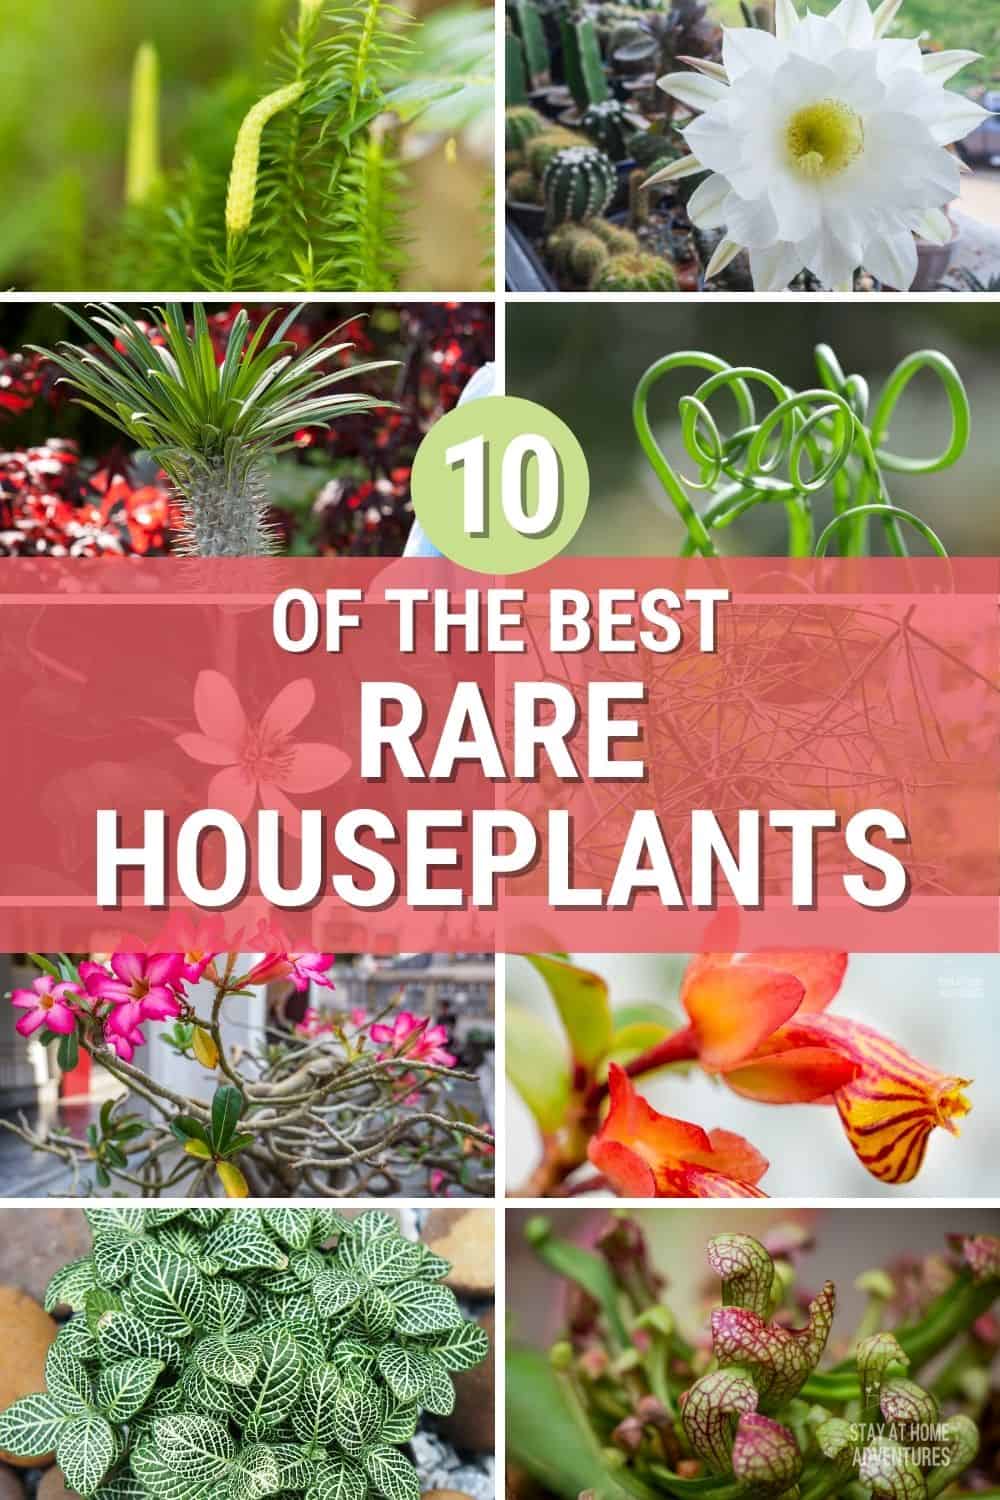 Learn all you need to know about rare houseplants, from what are they, what’s the most expensive to what are the top rare houseplants around. via @mystayathome